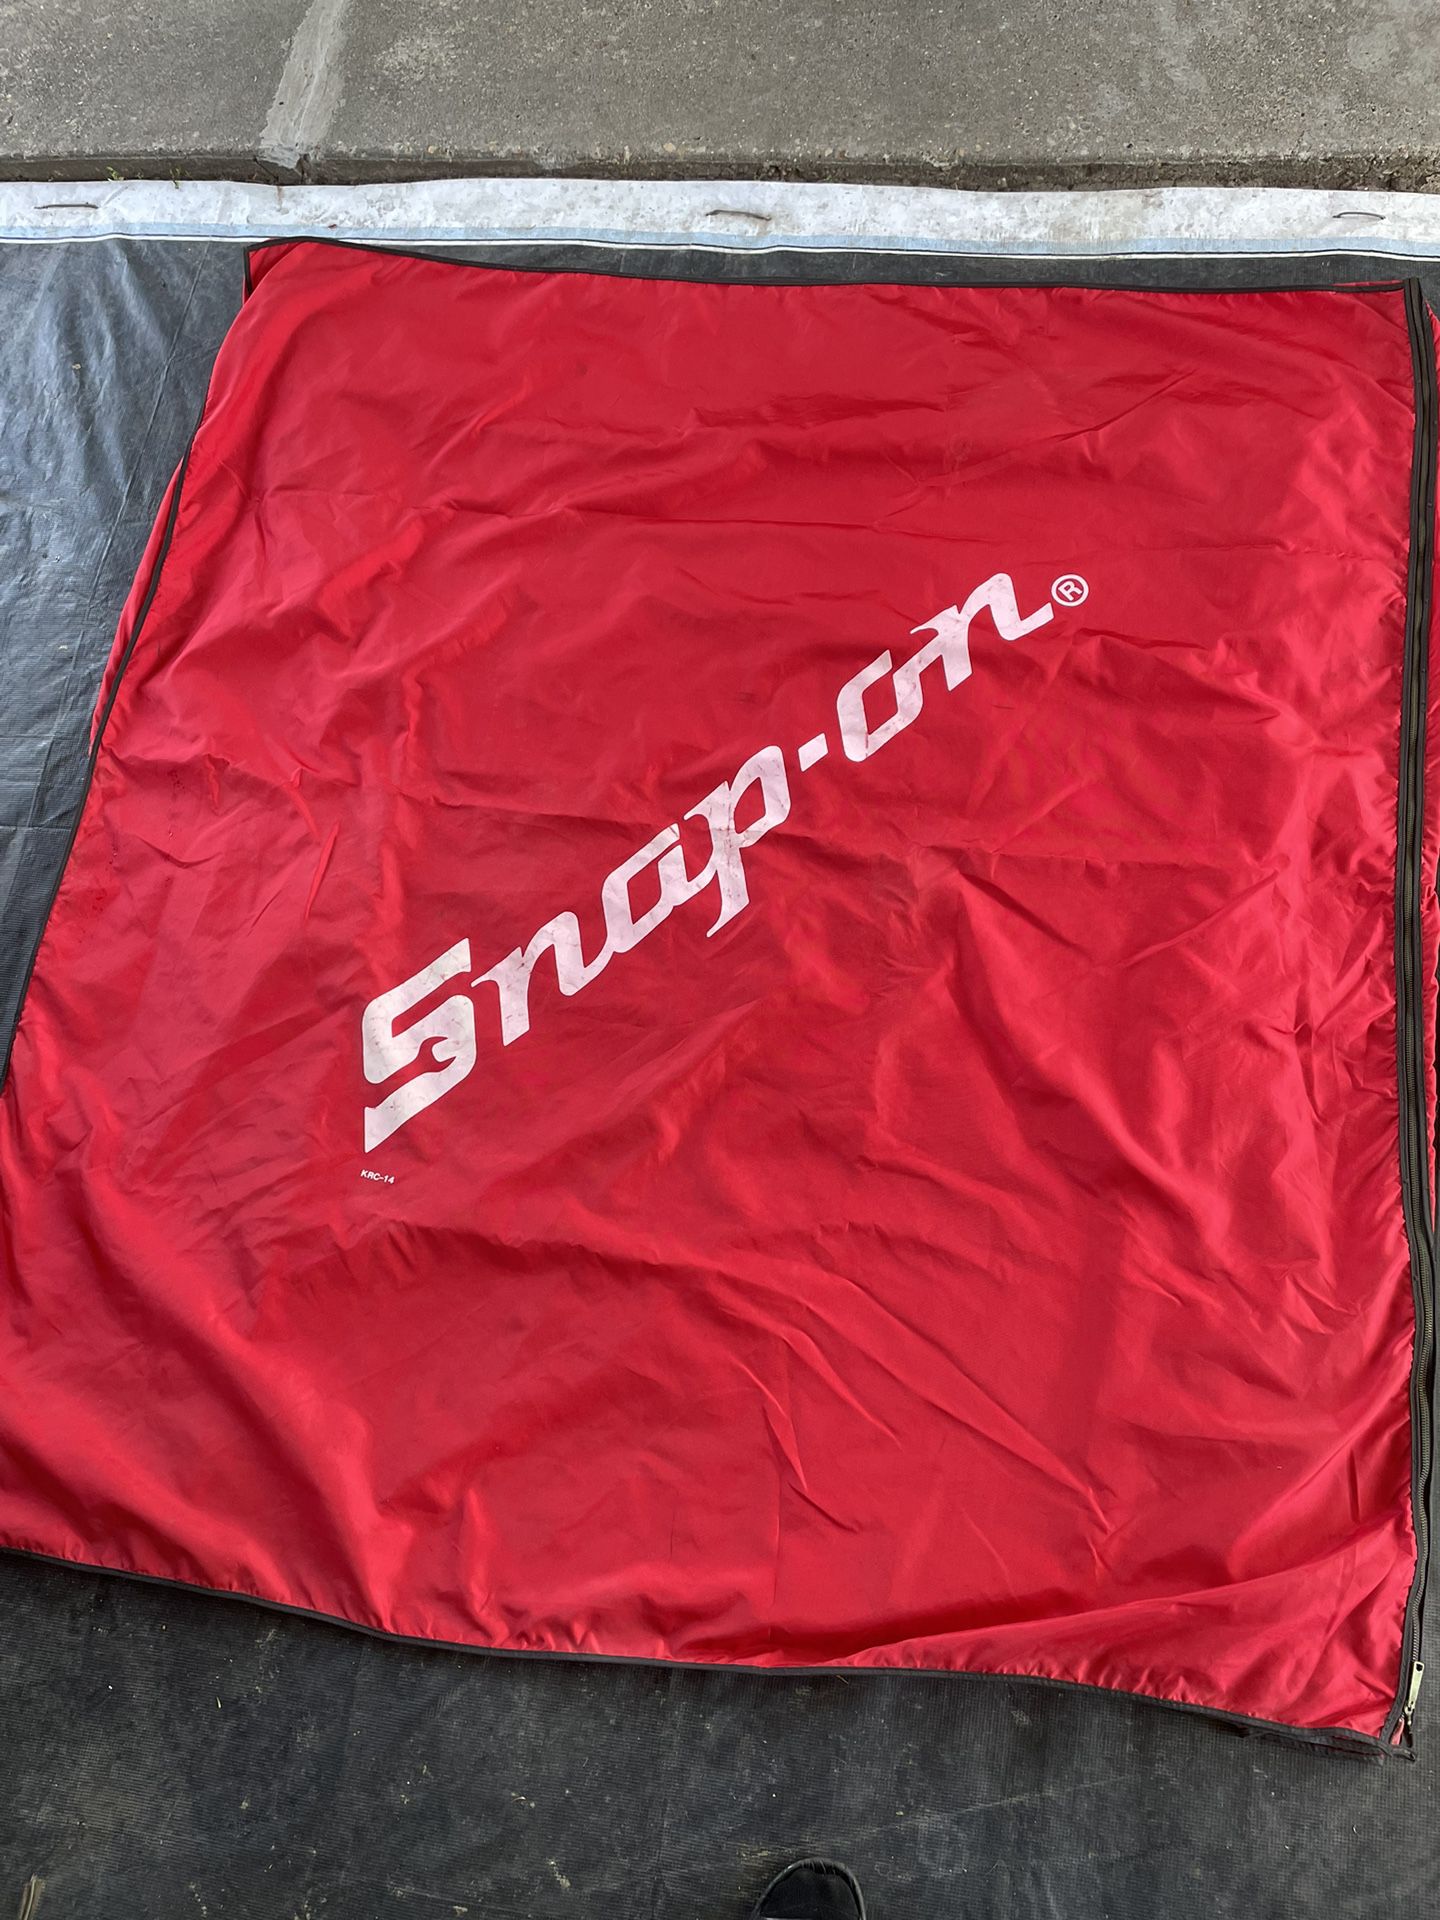 Snap On Tool Box Cover